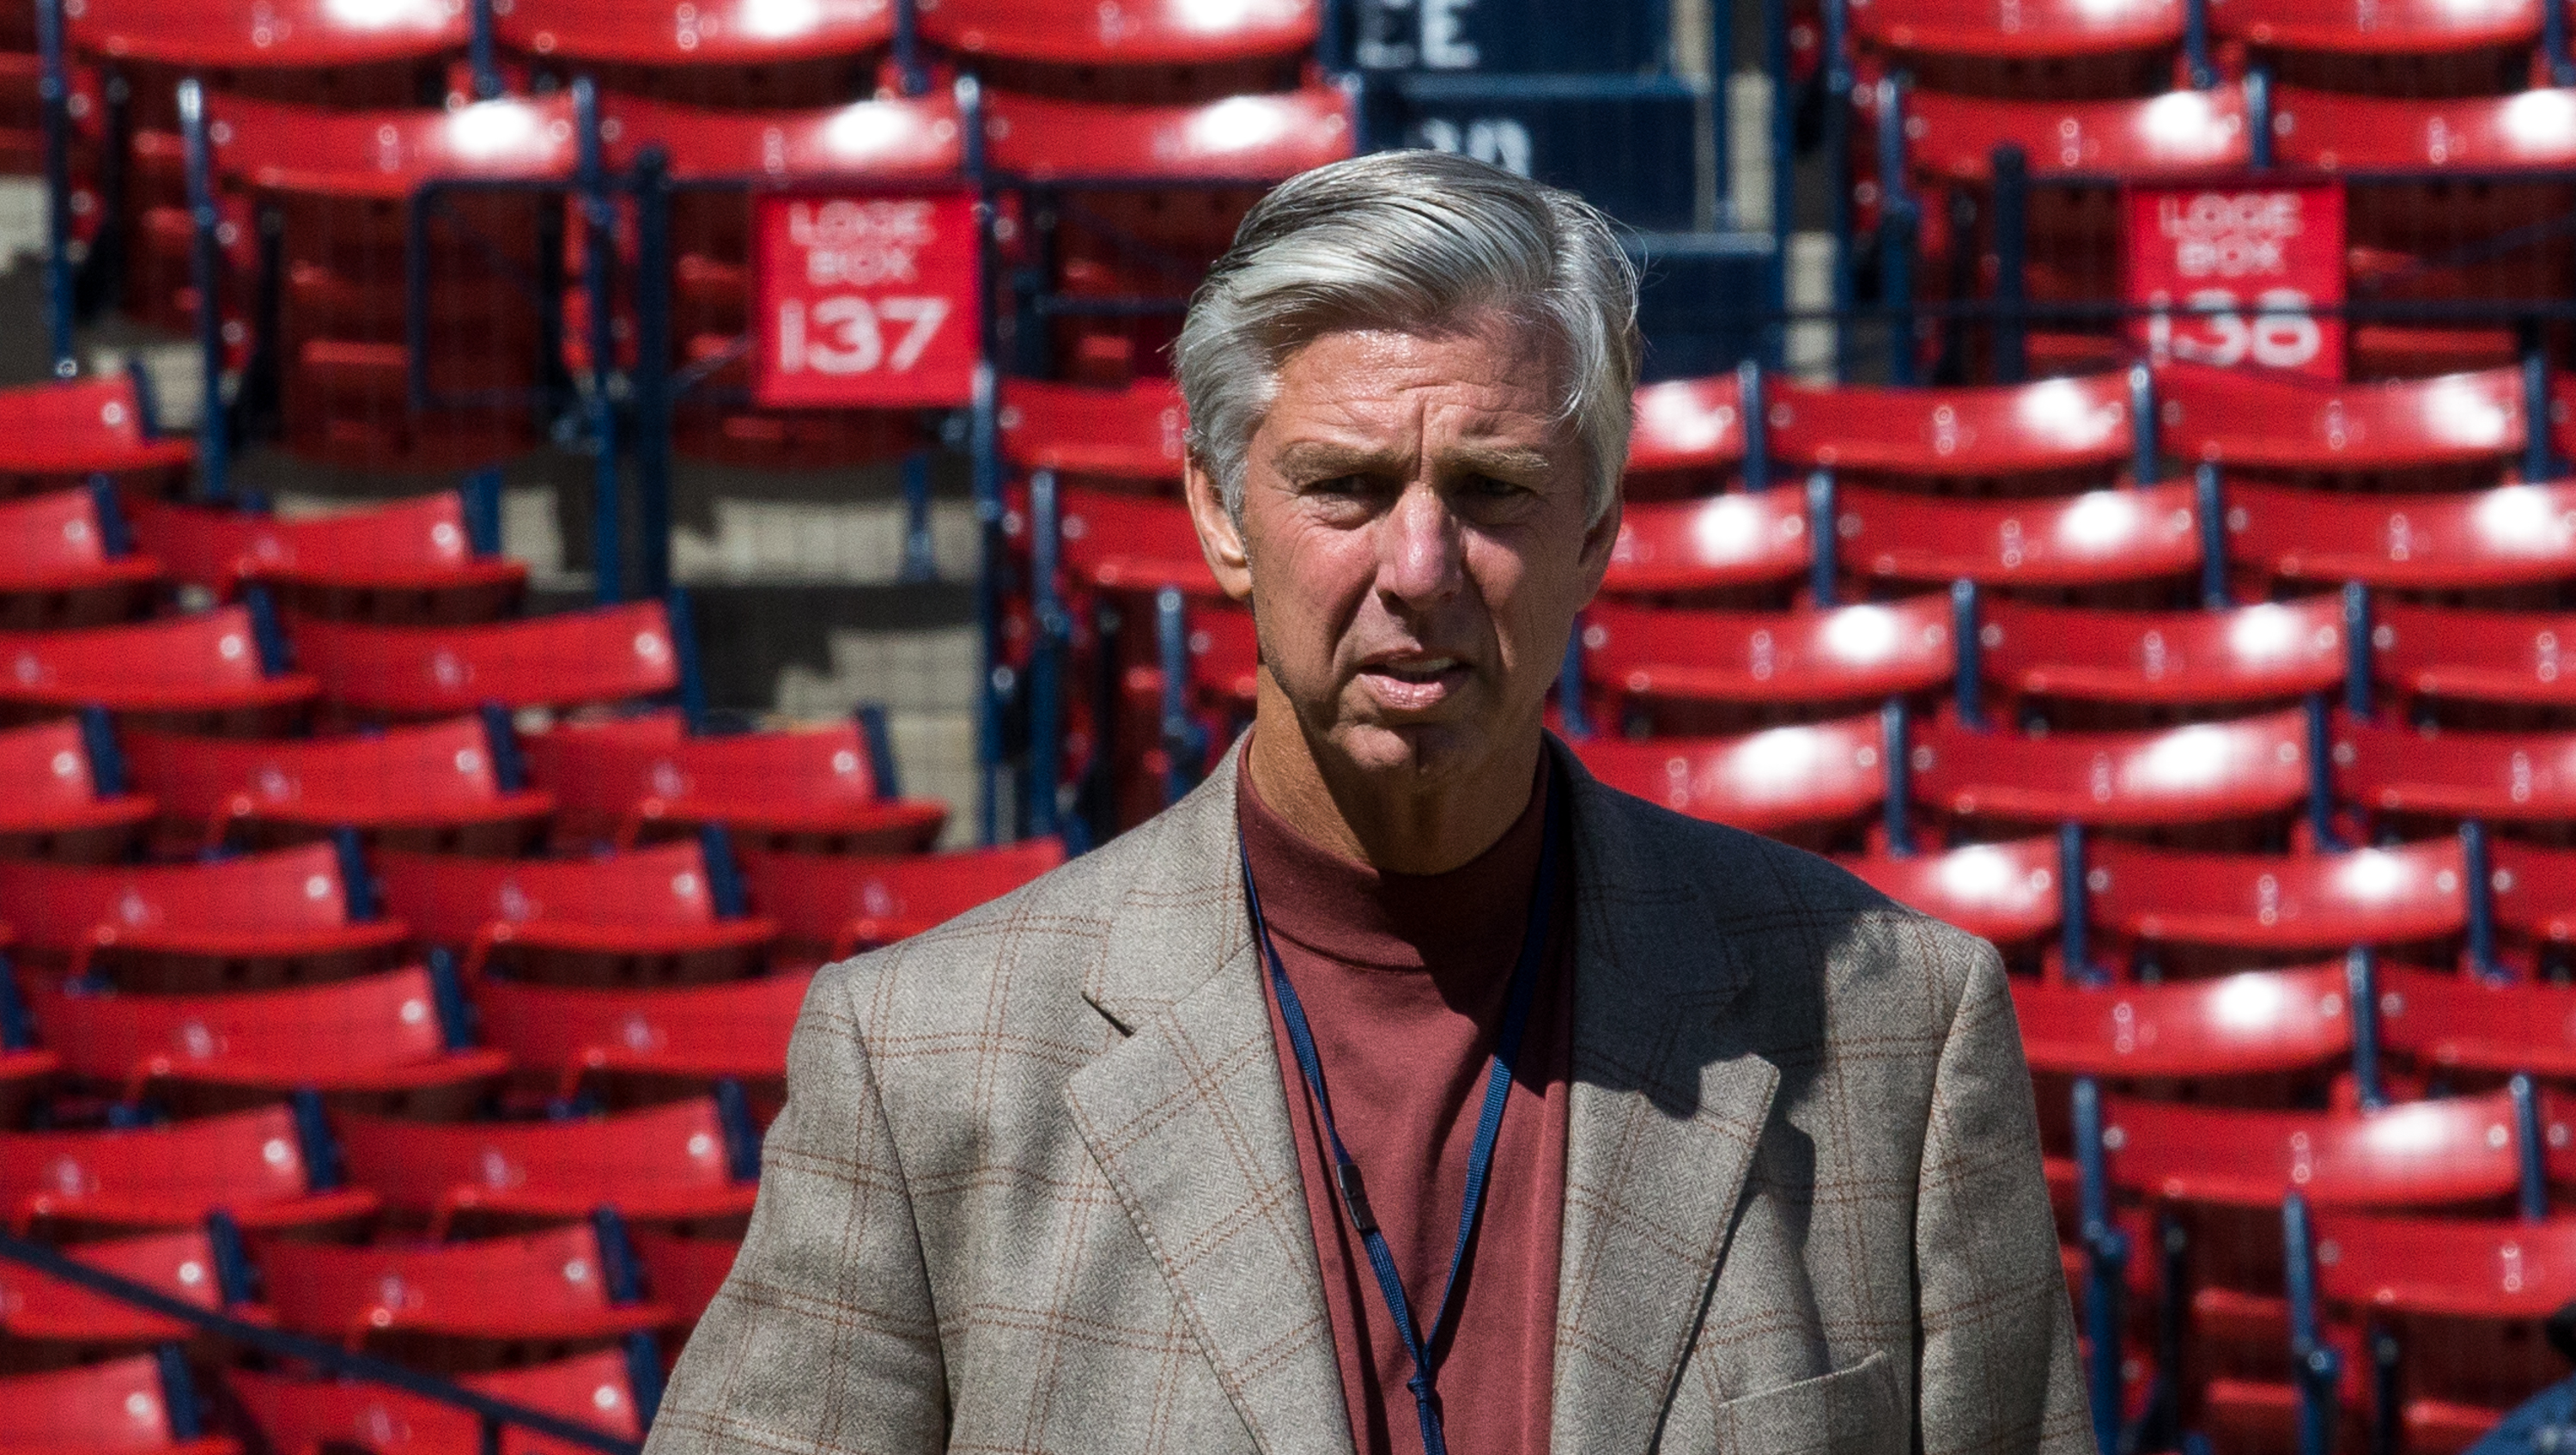 Boston Red Sox 2018: Issues Dave Dombrowski must address to